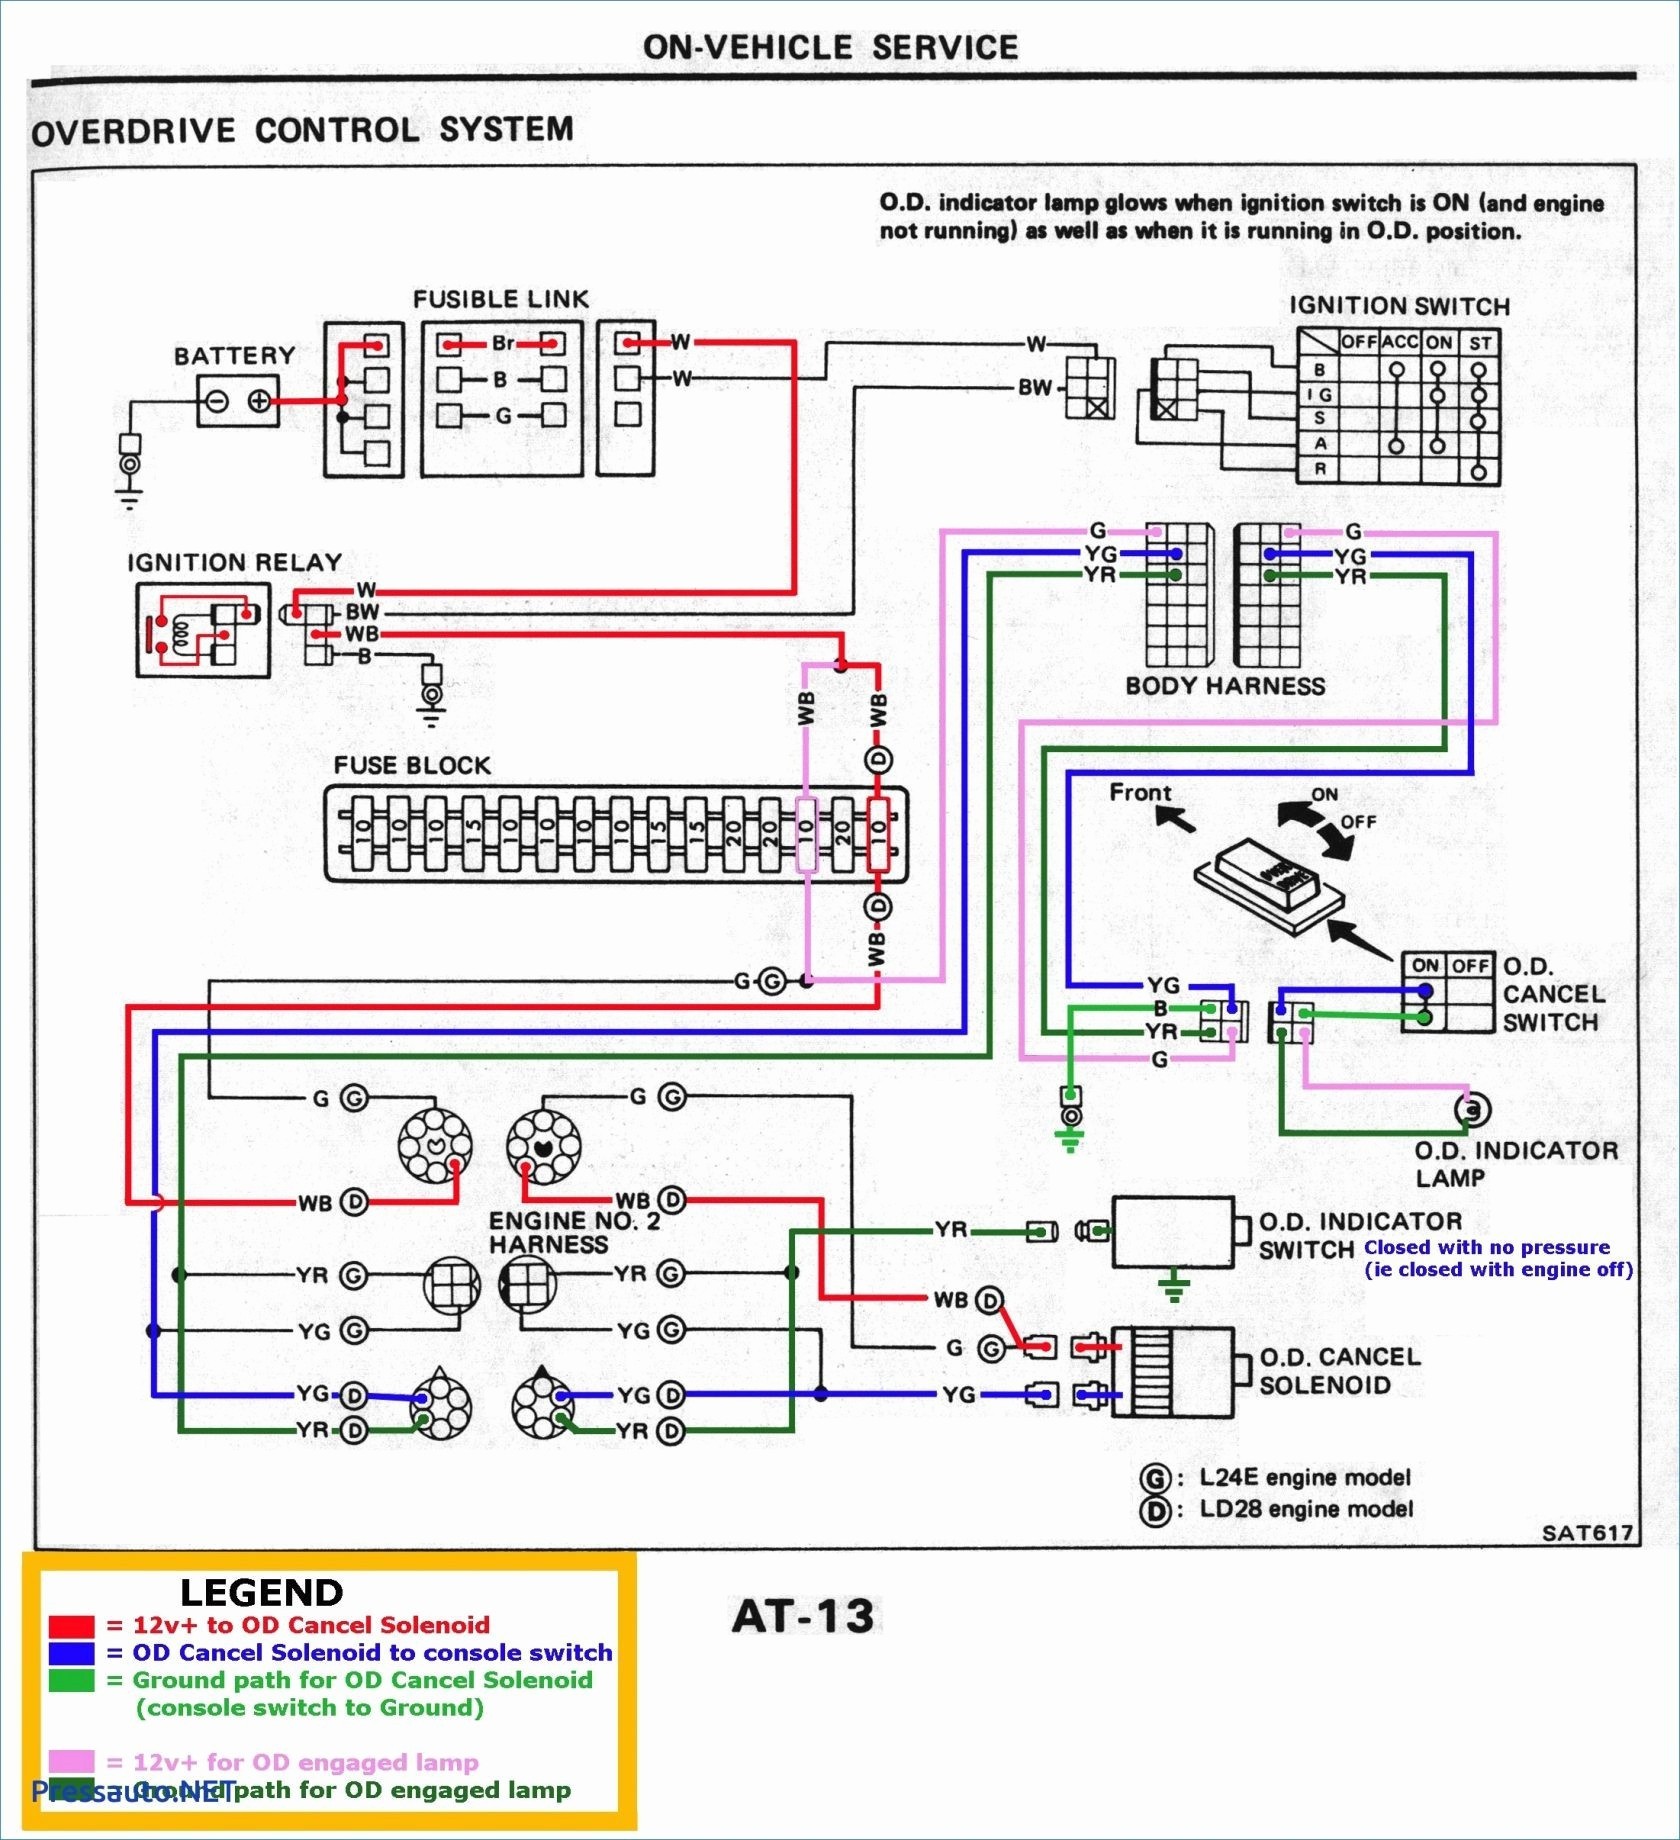 Ac Winch Wiring Diagram Refrence Wiring Diagram for Warn Winch Fresh Wiring Diagram Warn A2000 Wiring